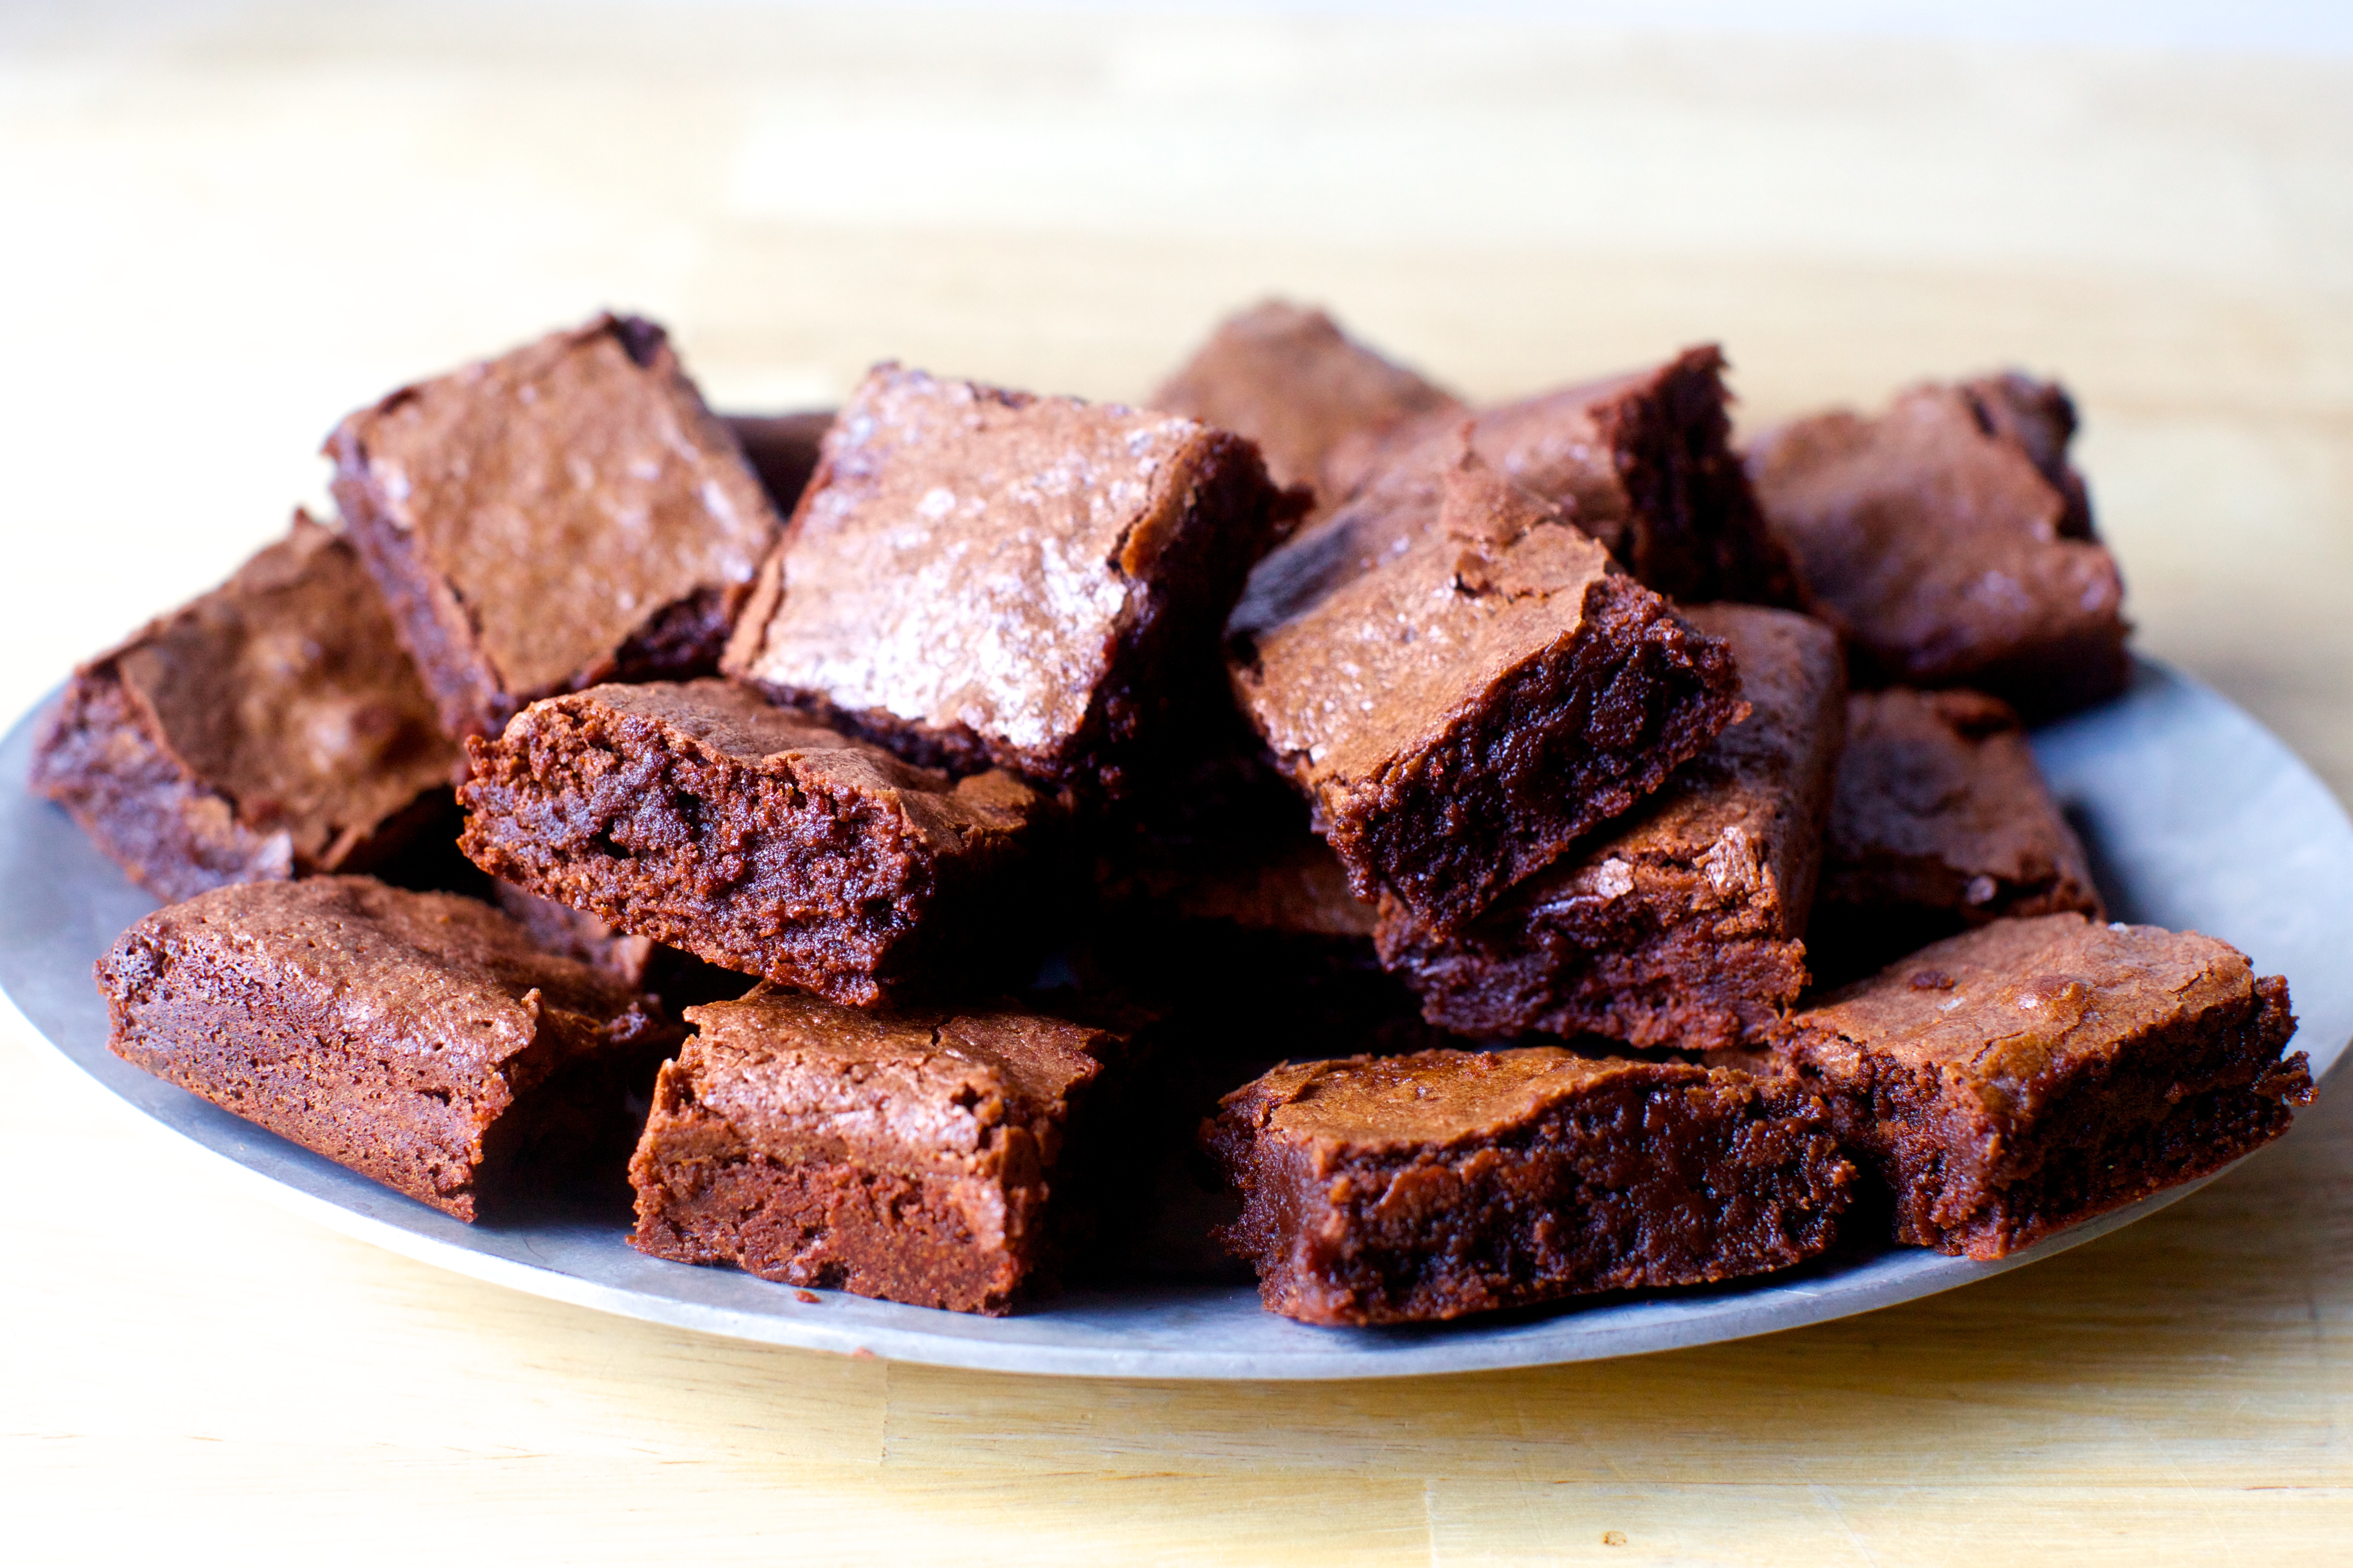 Image result for brownies